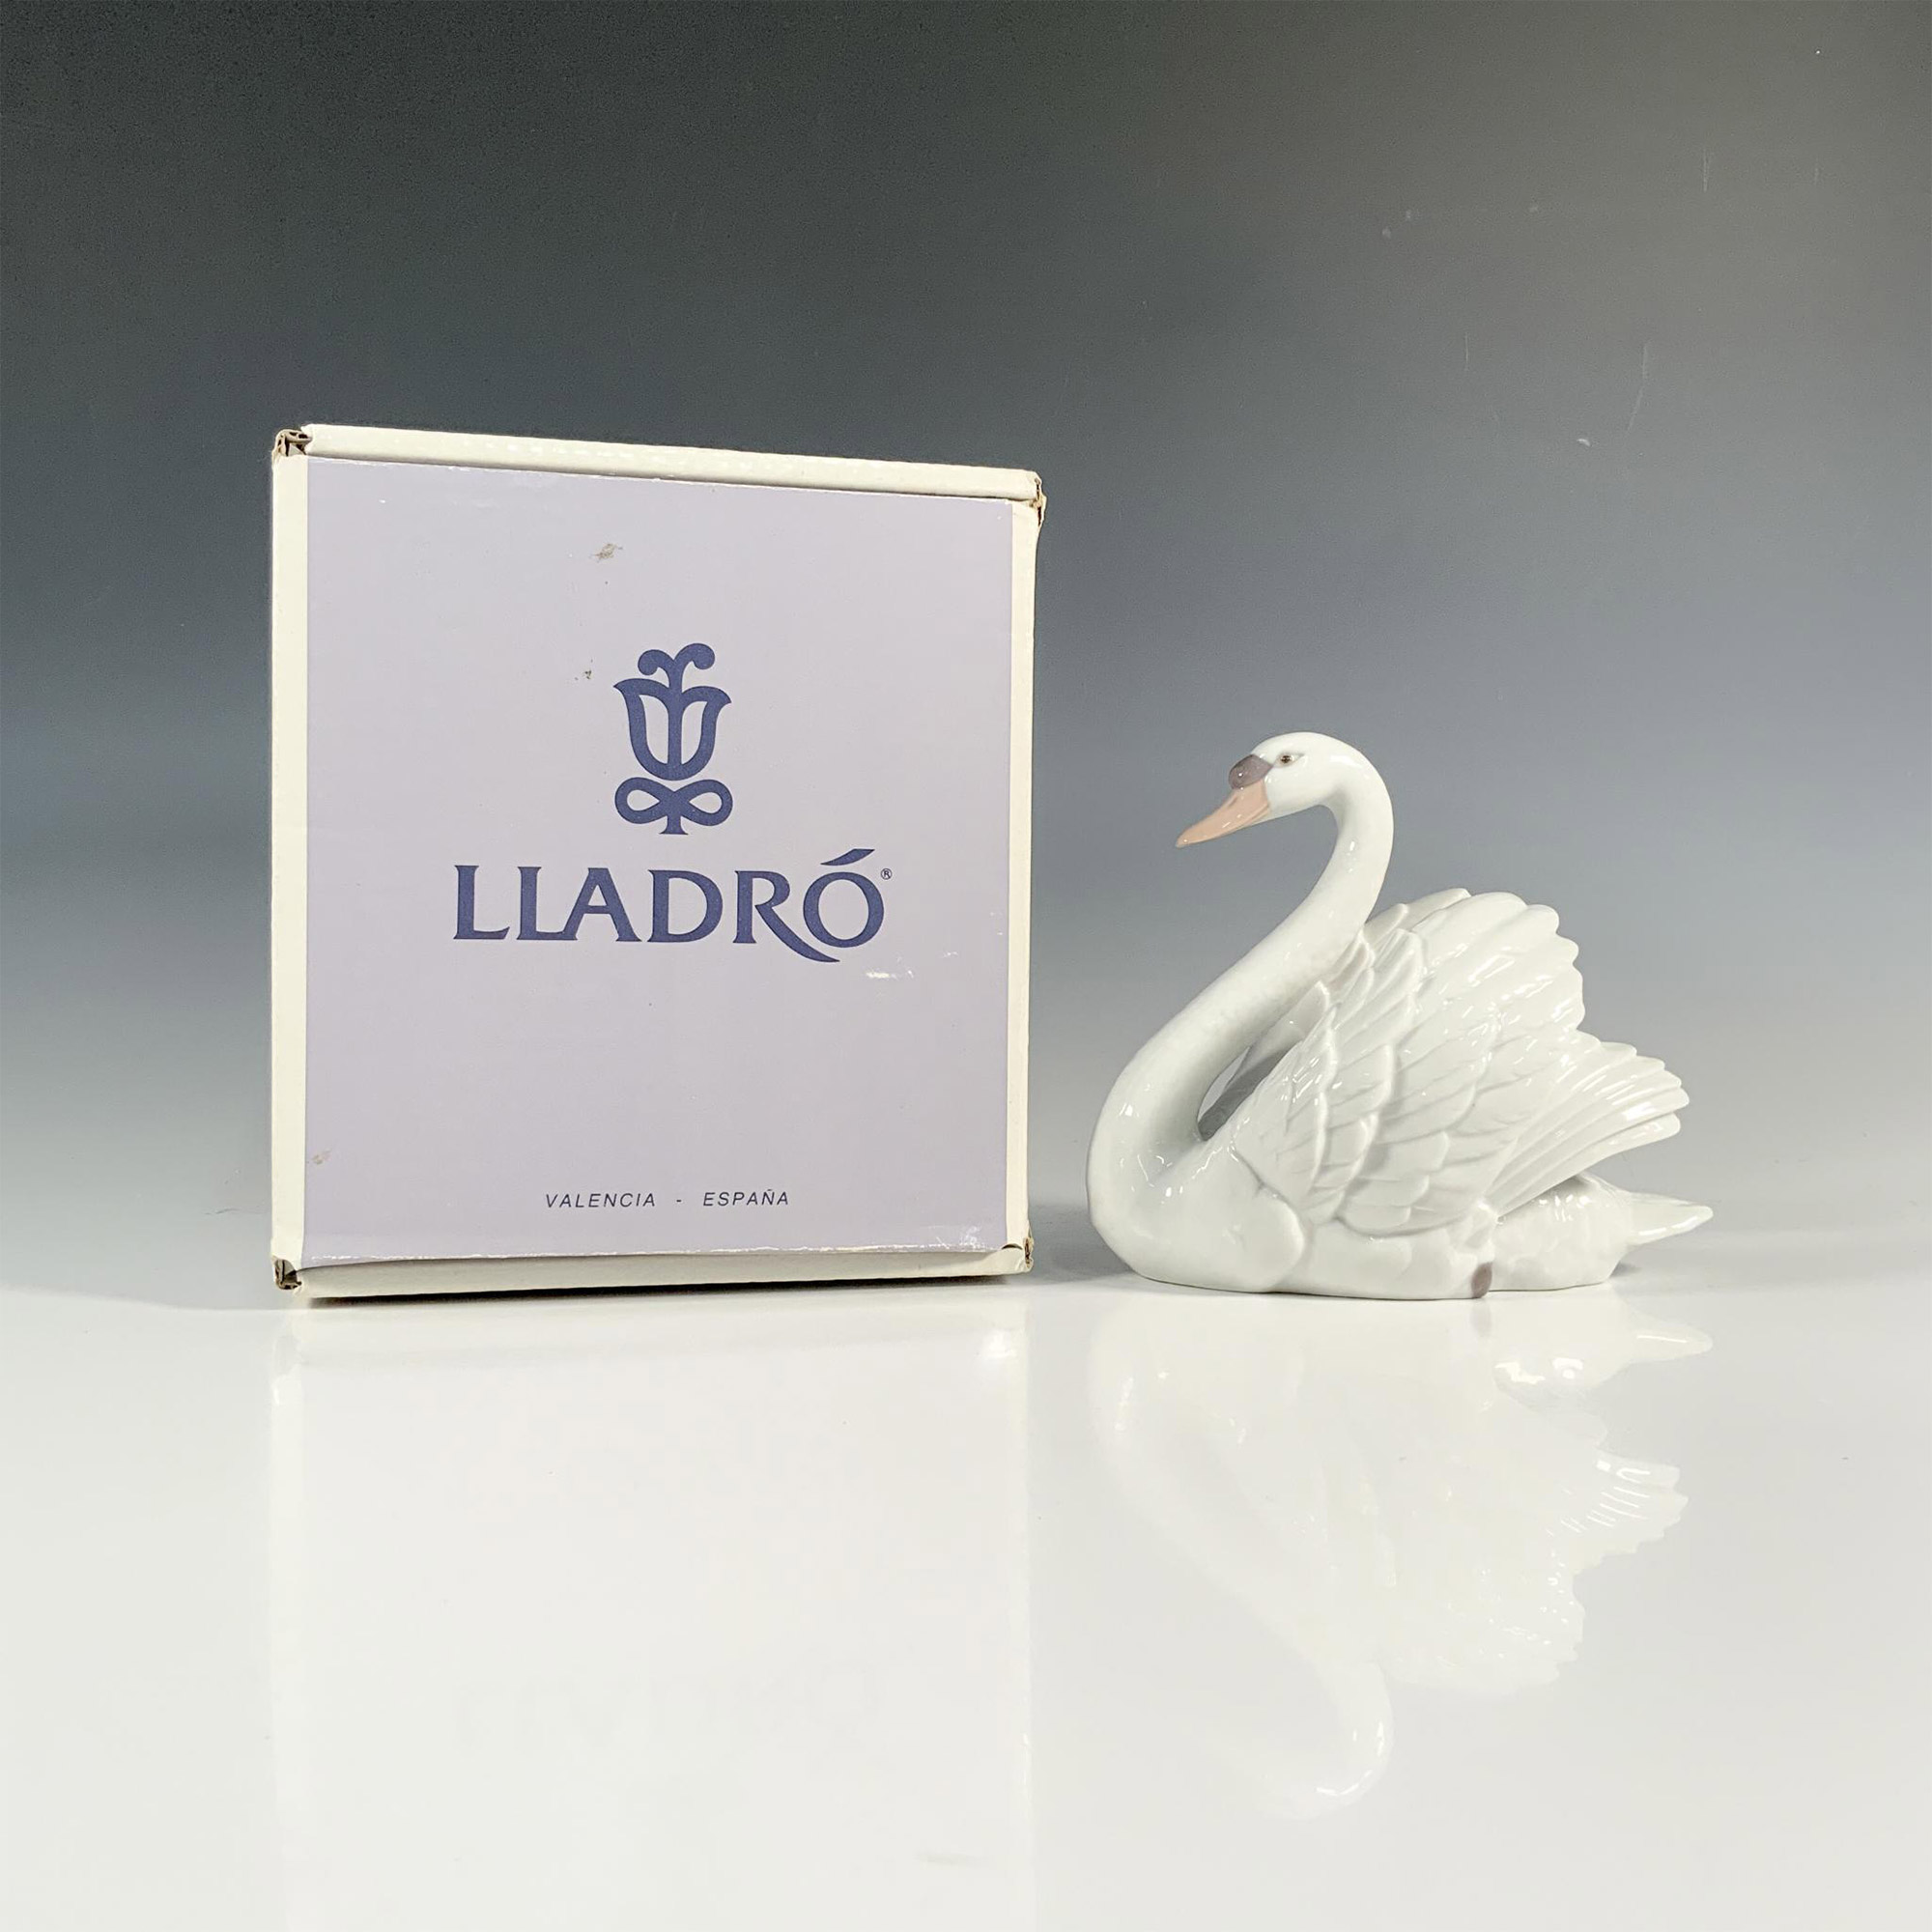 Swan With Wings Spread 1005231 - Lladro Porcelain Figurine - Image 4 of 4